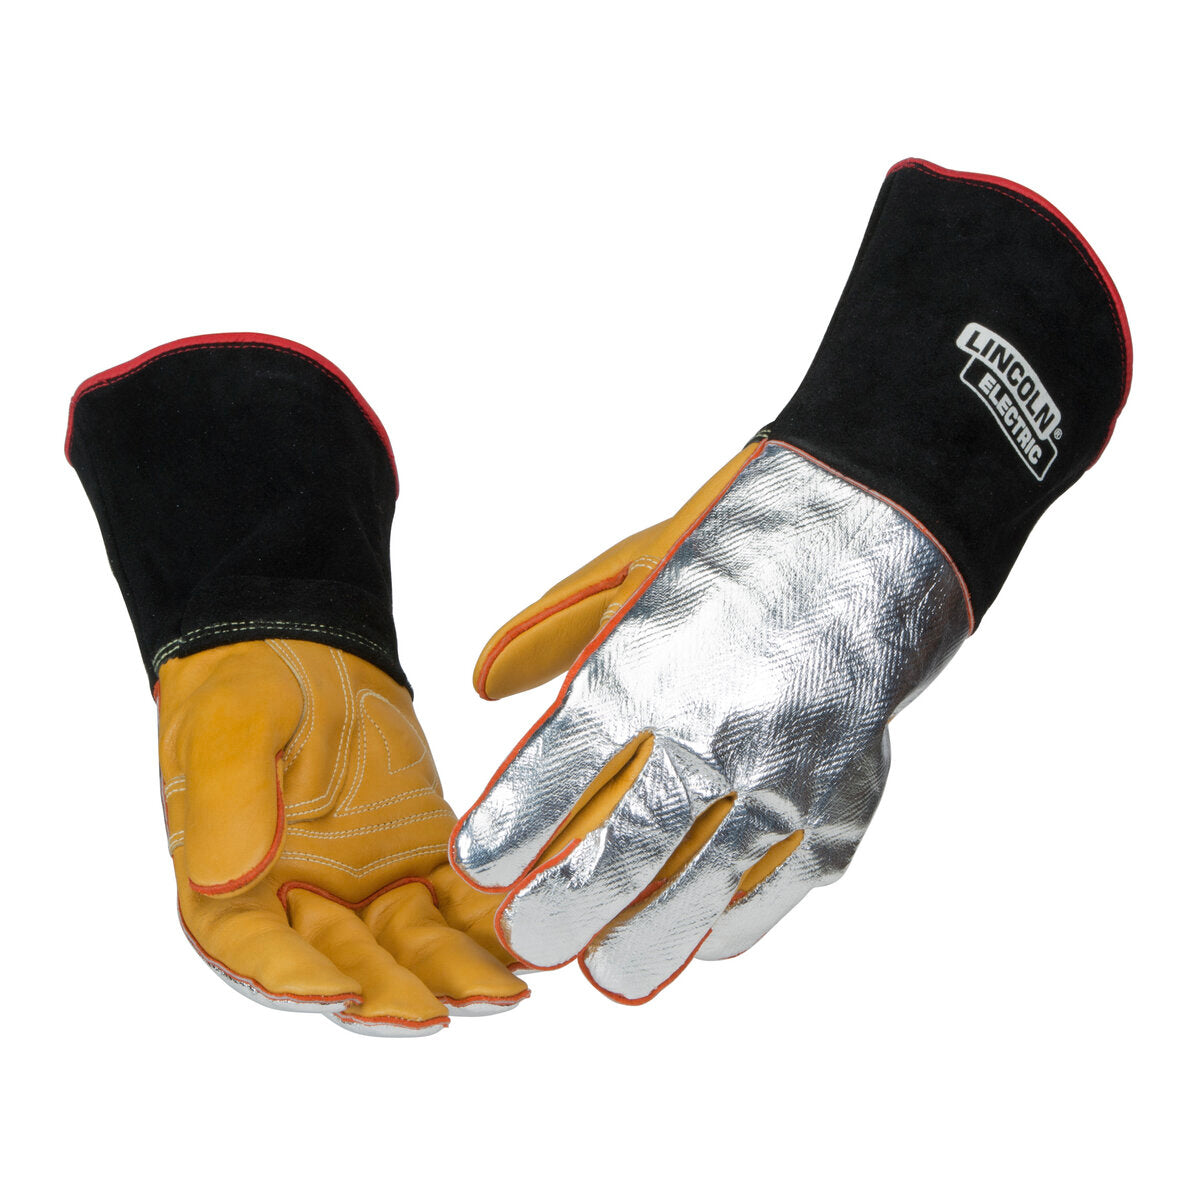 Lincoln Electric - Heat Resistant Welding Gloves - XLarge - K2982-XL